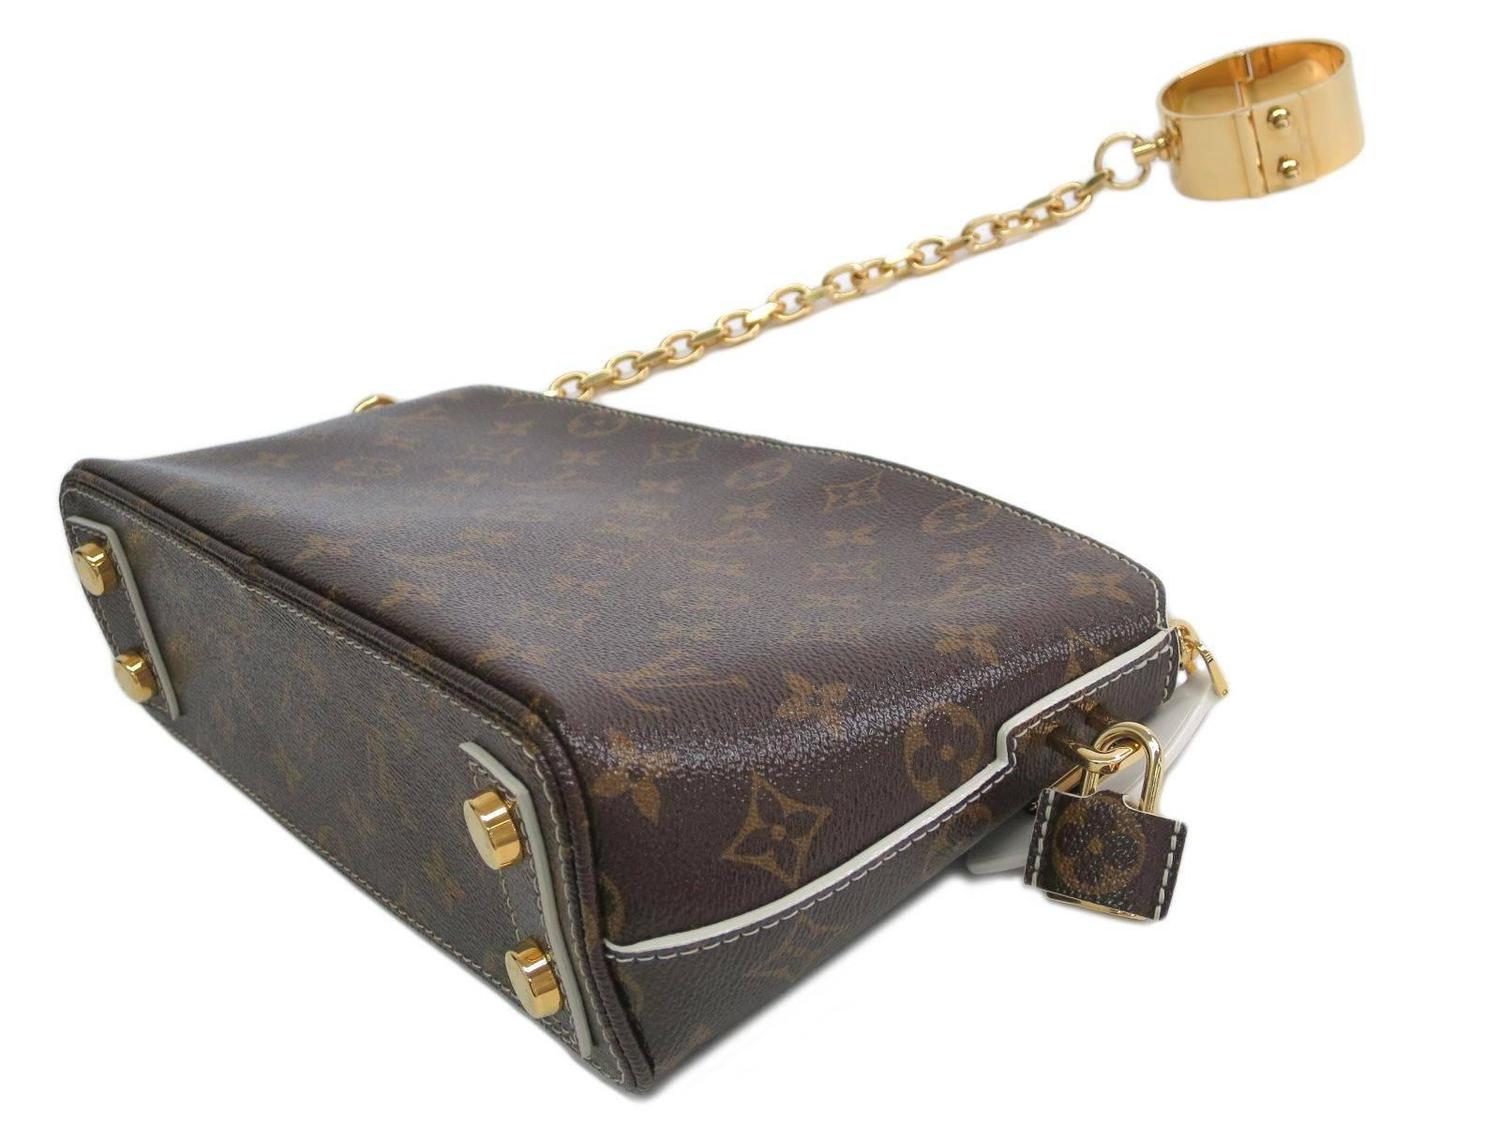 Louis Vuitton Monogram Canvas Gold Chain Clutch Cuff Bag with All Accessories at 1stdibs